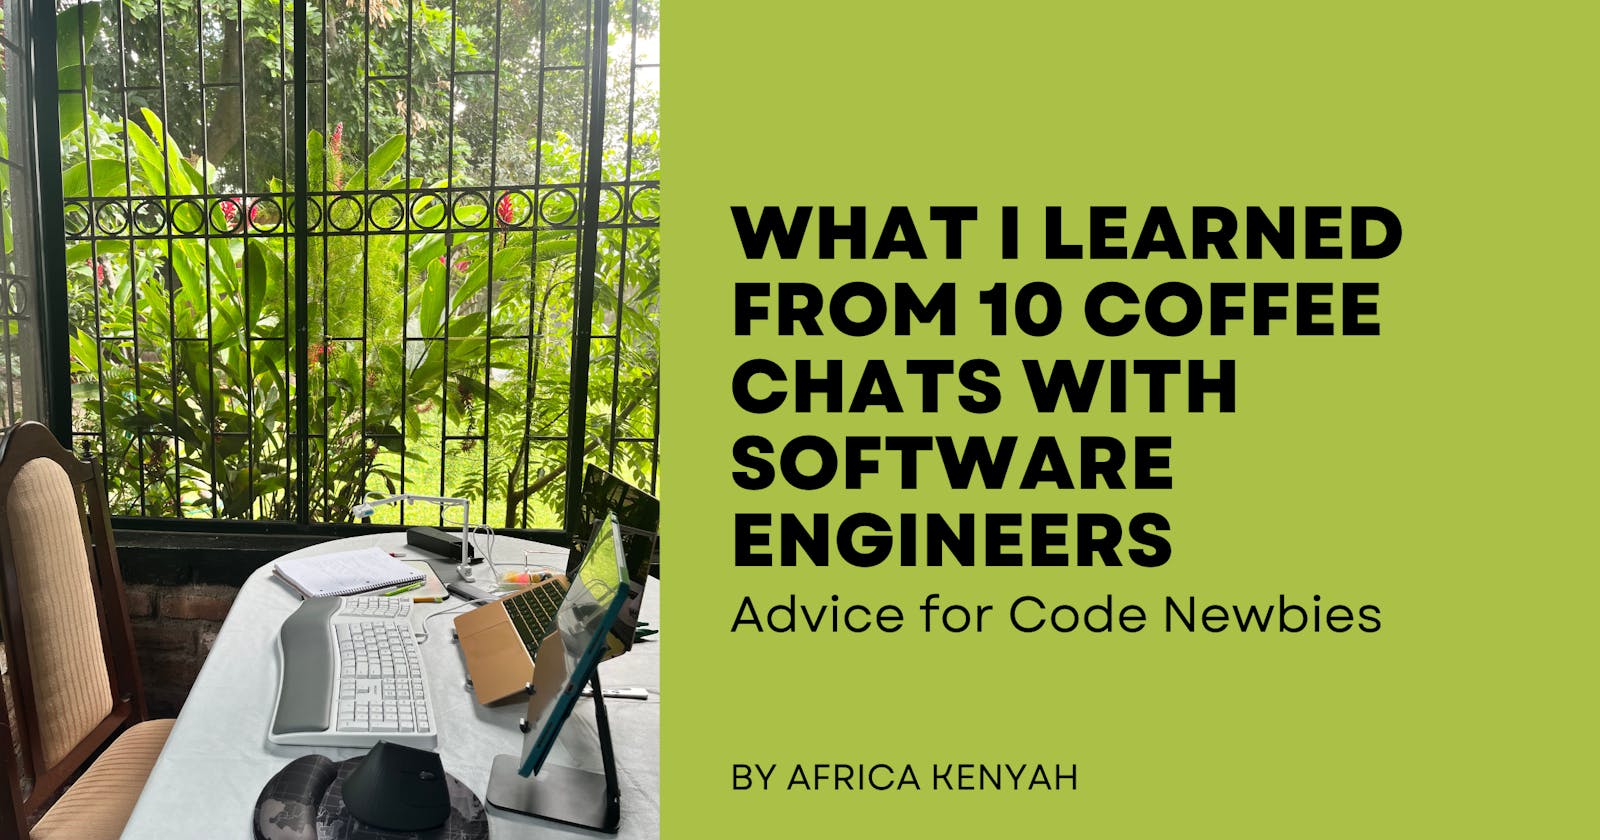 What I Learned from 10 Coffee Chats with Software Engineers